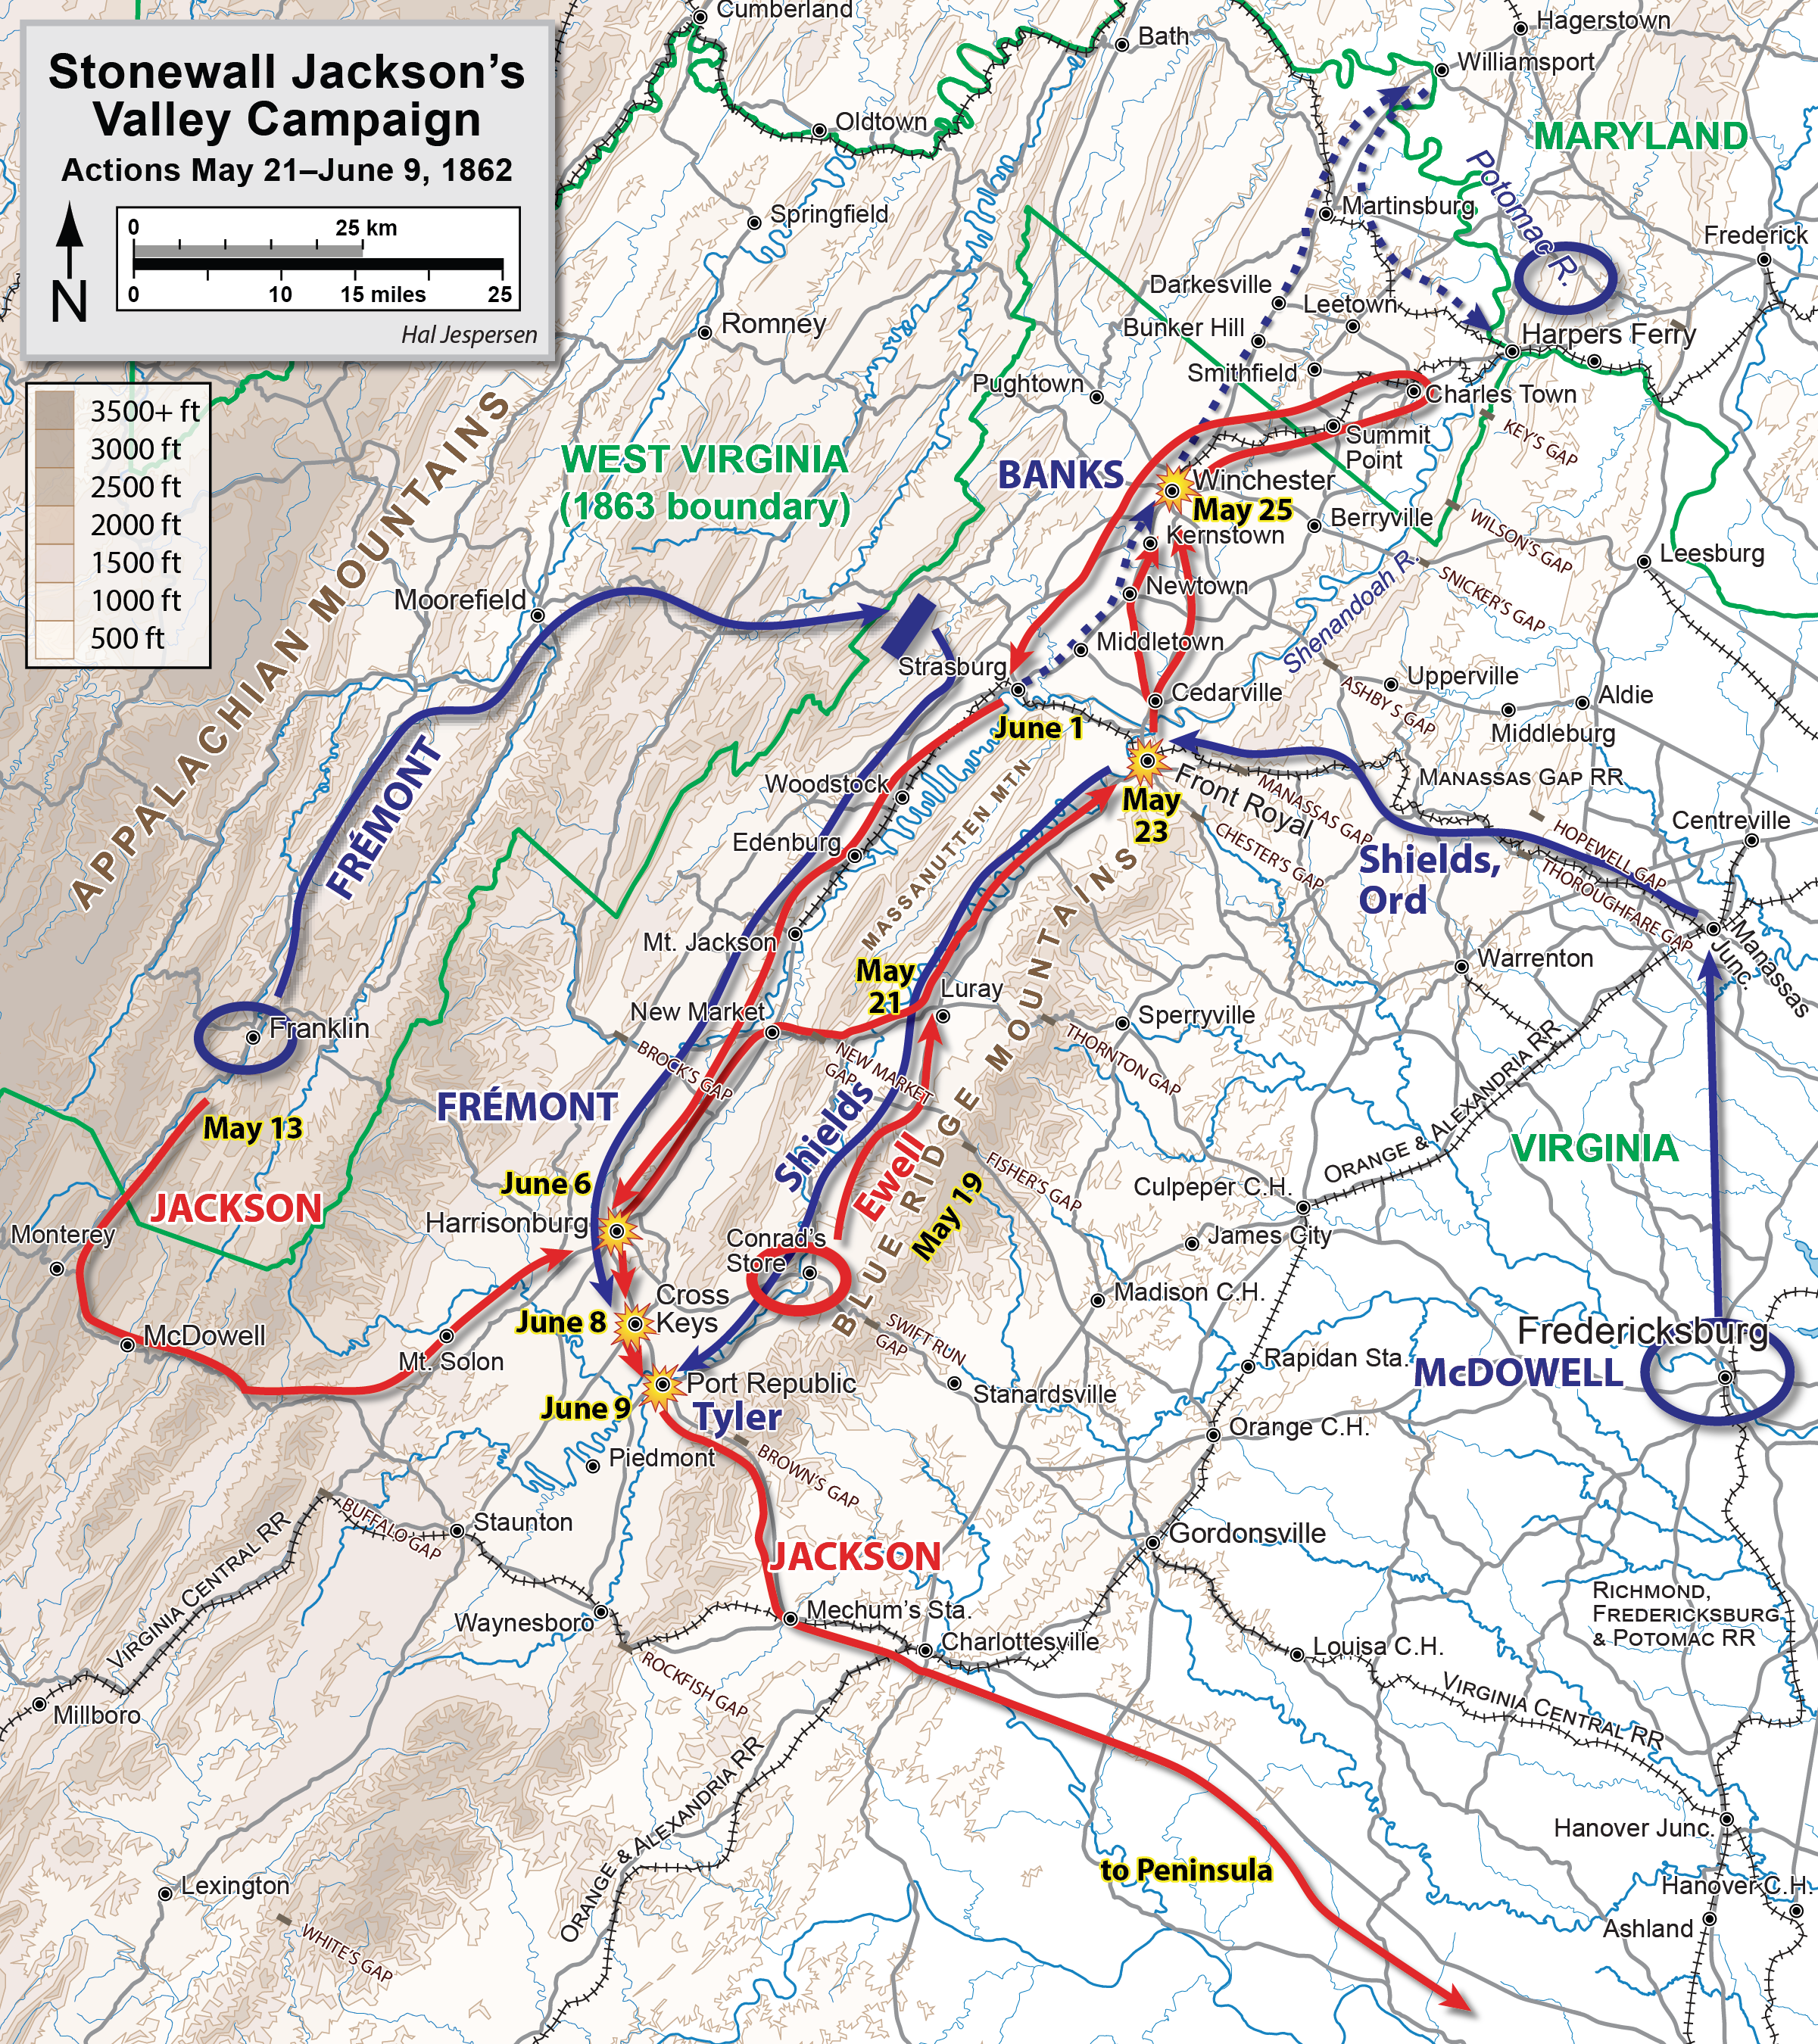 Jackson's Valley campaign